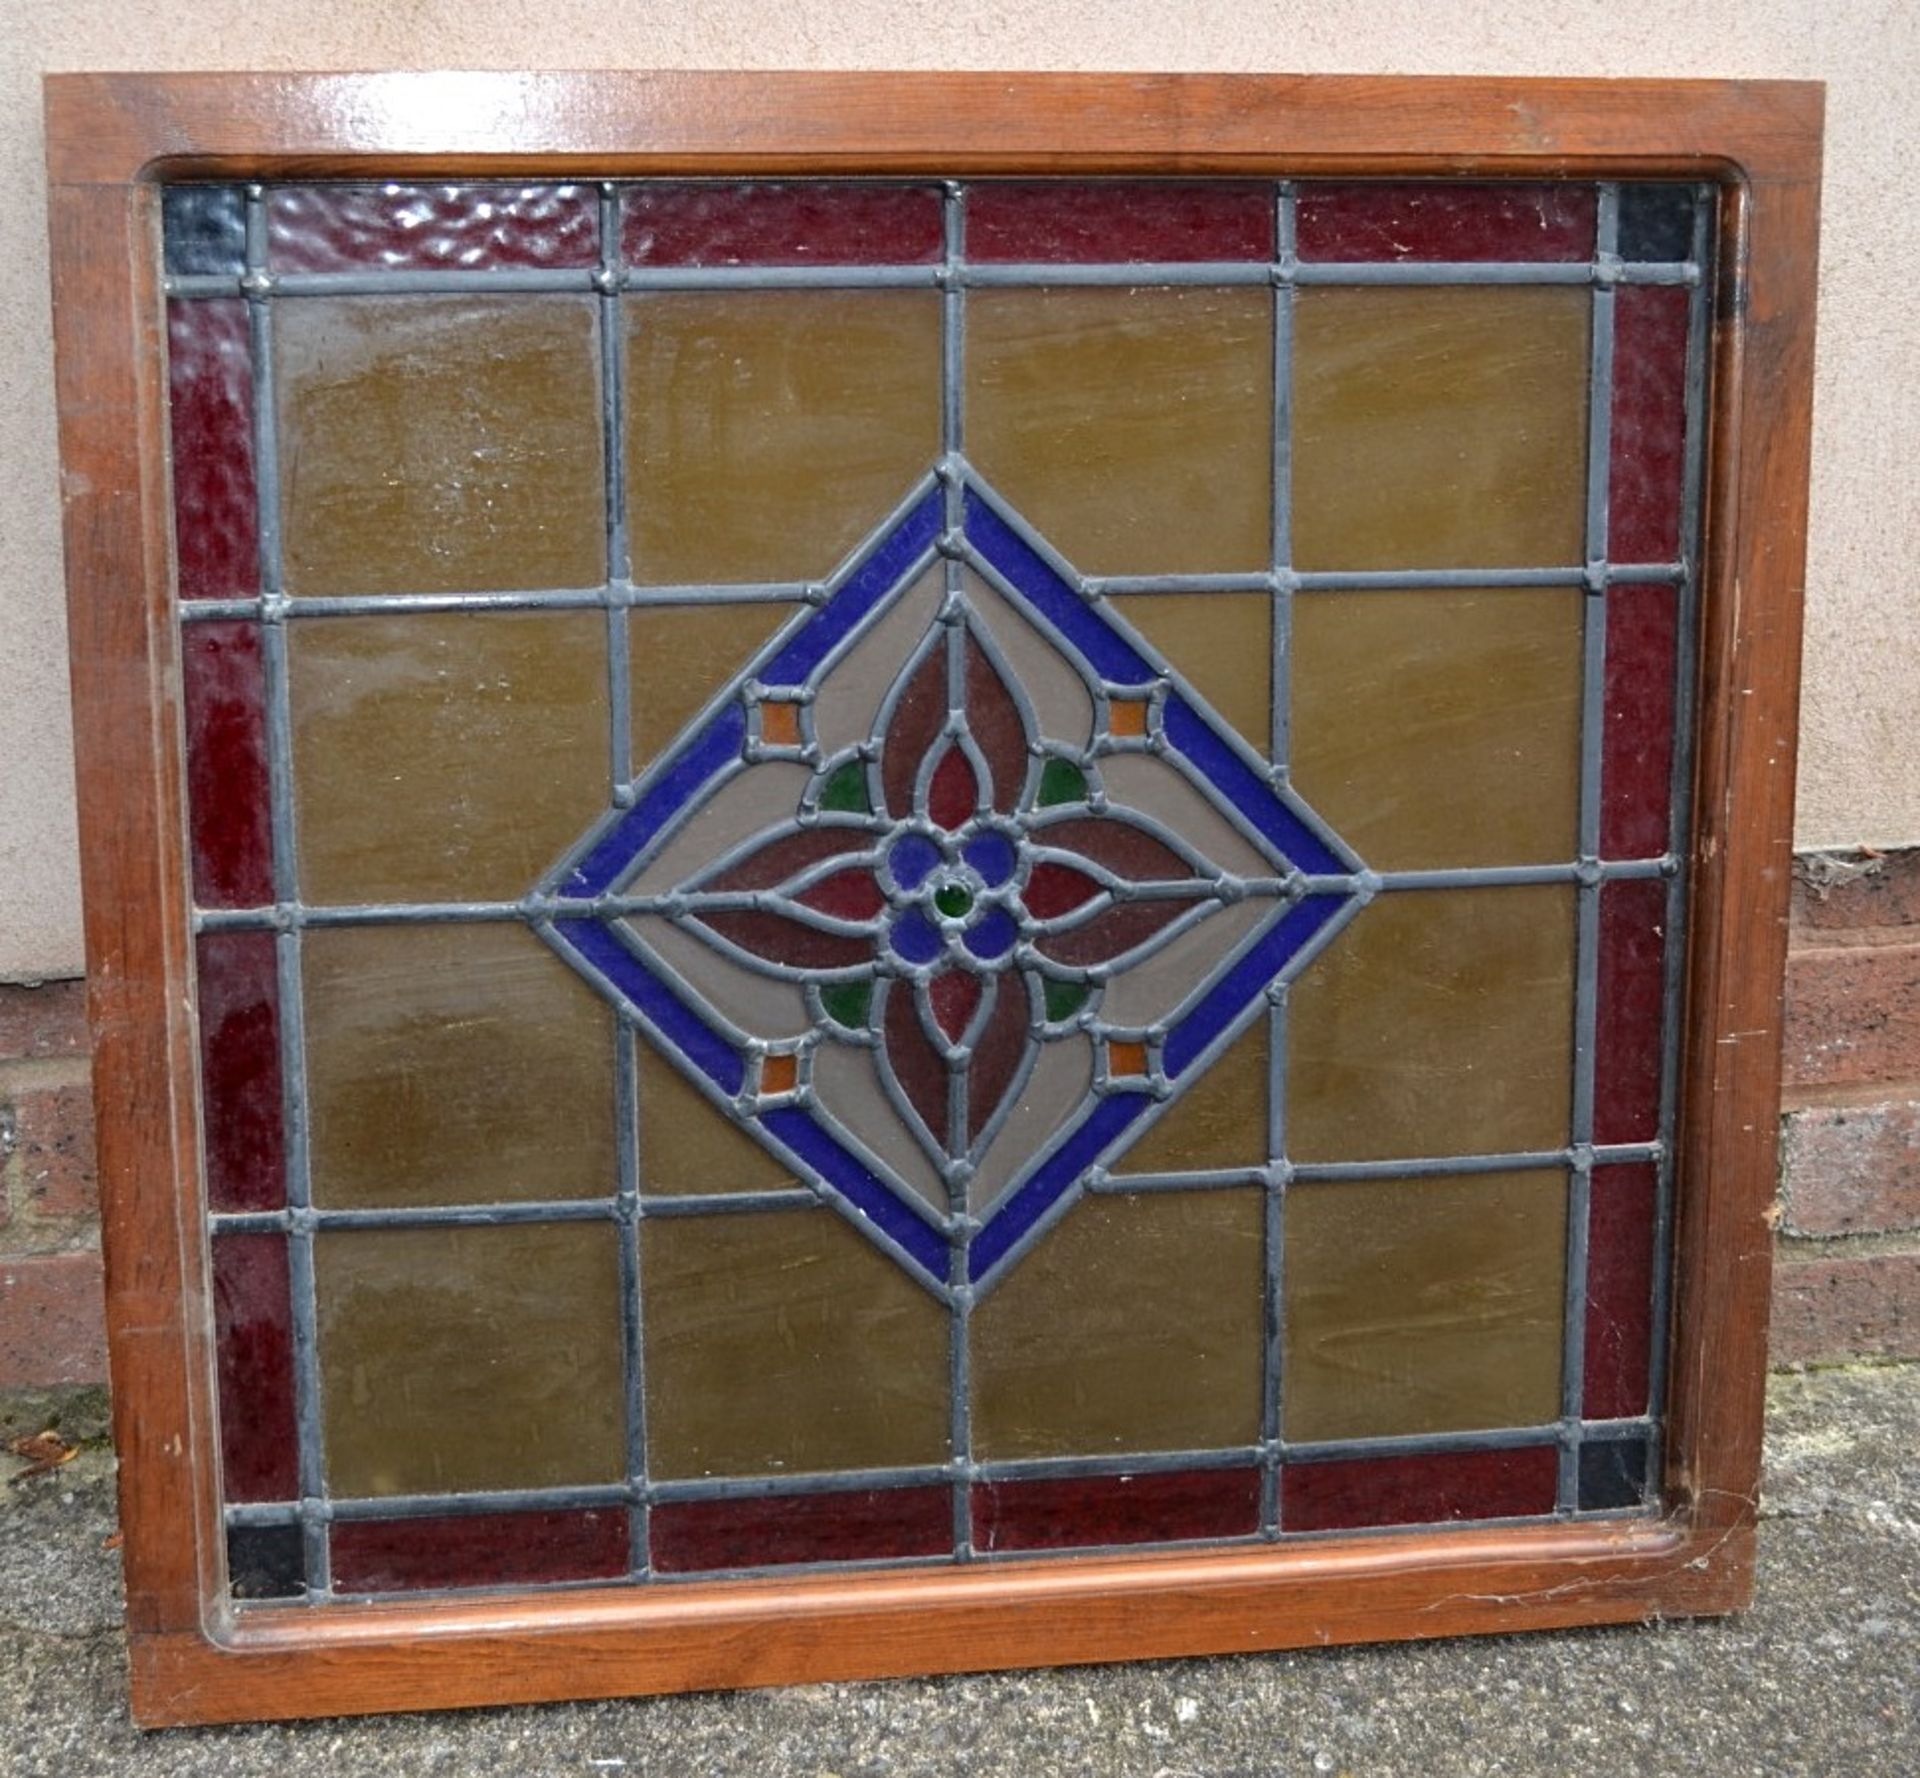 1 x Stain Glass Window In Square Wooden Frame - Dimensions: 64 x 65.5cm - Ref: KH207 / SHD - CL168 -